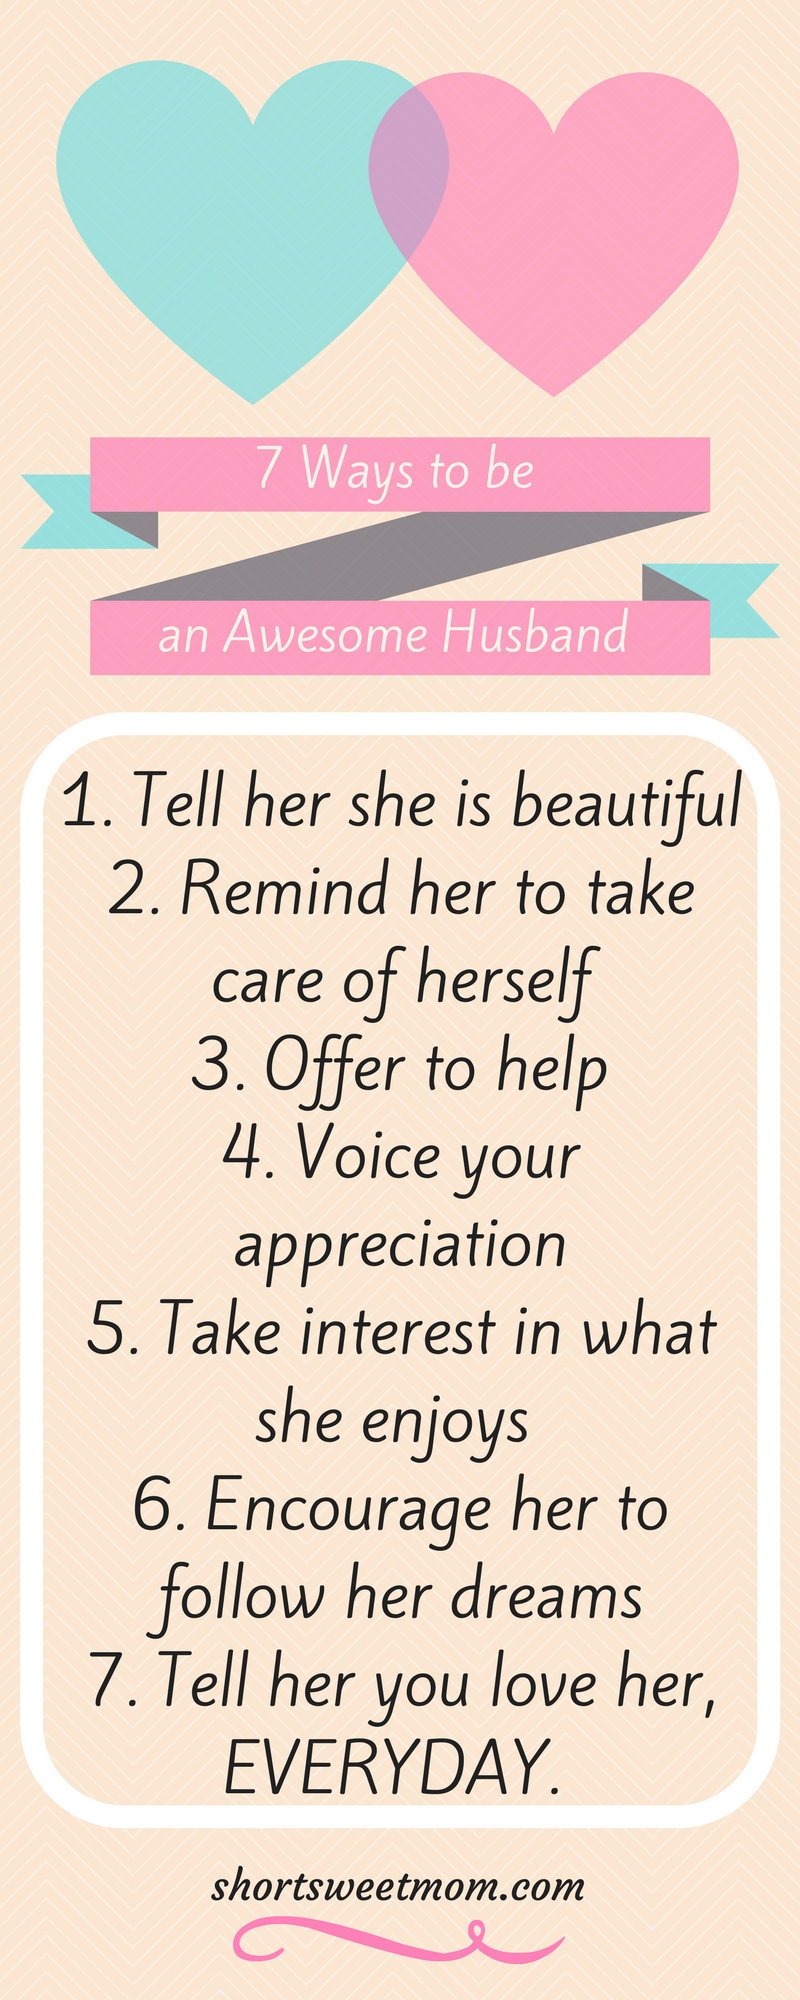 7 Ways to be an Awesome Husband, Advice from a Happy Wife. Visit shortsweetmom.com to find 7 ways you can be an awesome husband. Wives feel free to share with your husbands, tell them I told you to.